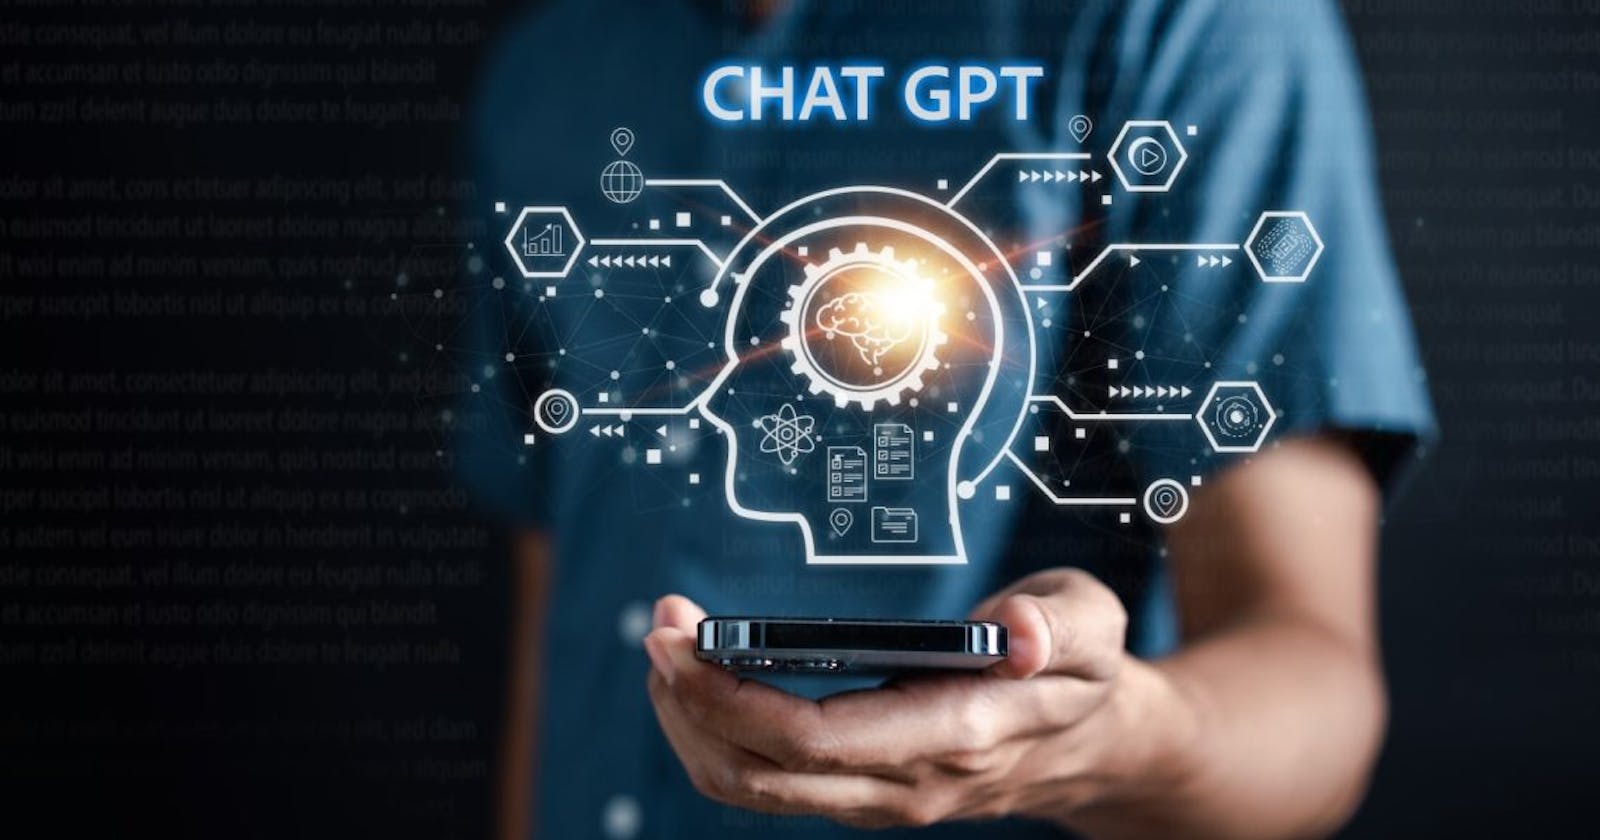 ChatGPT: The AI Language Model That's Changing the Game